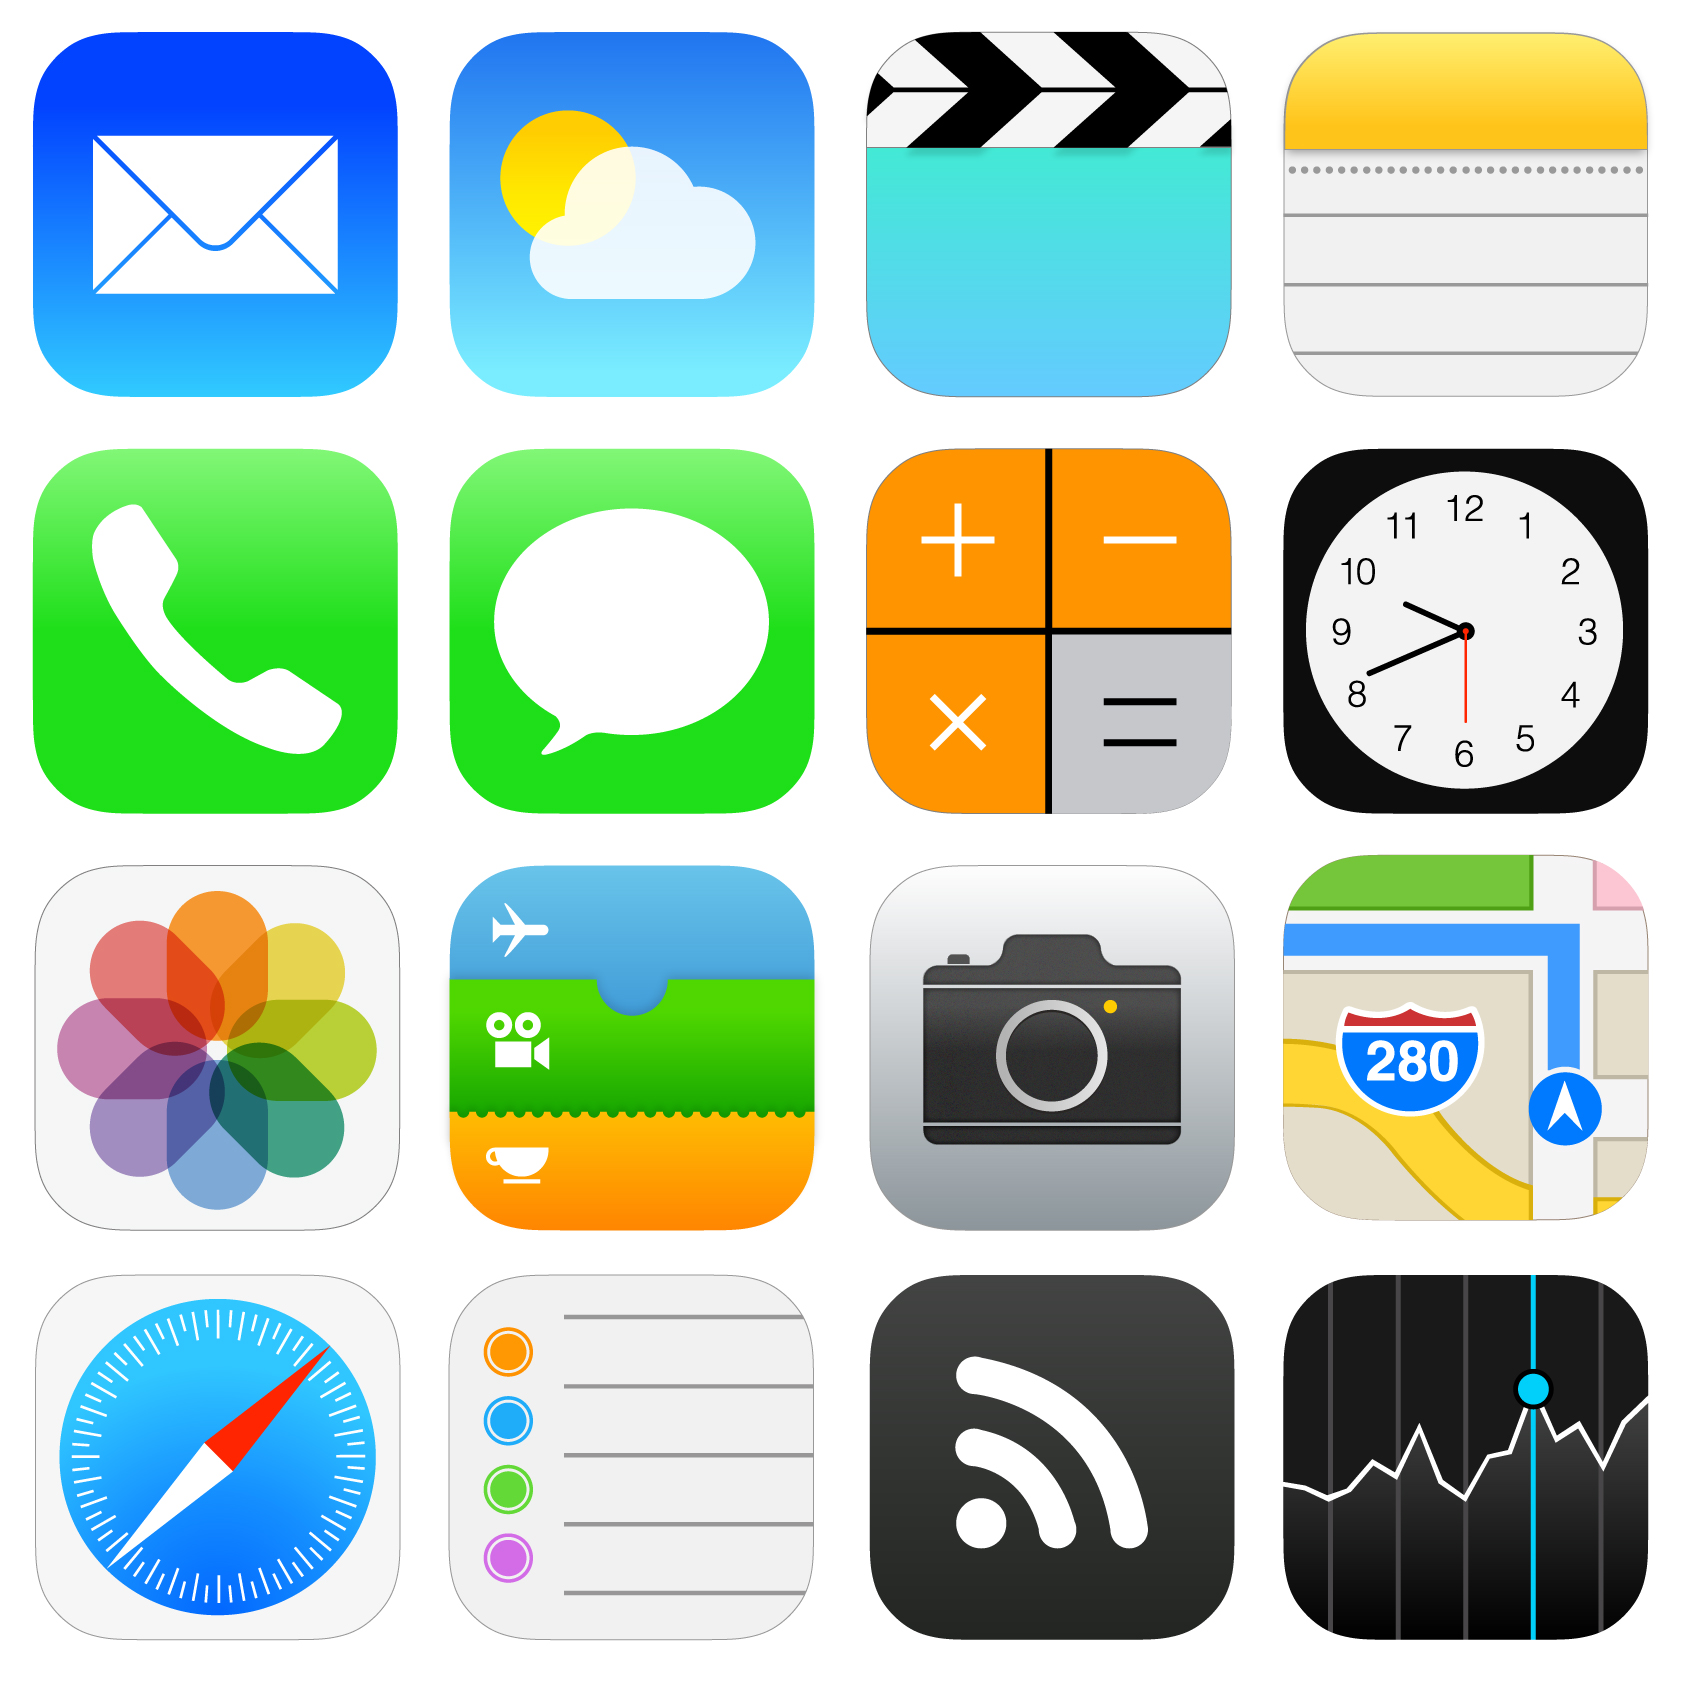 13-apple-iphone-app-icons-images-iphone-weather-app-icon-apple-app